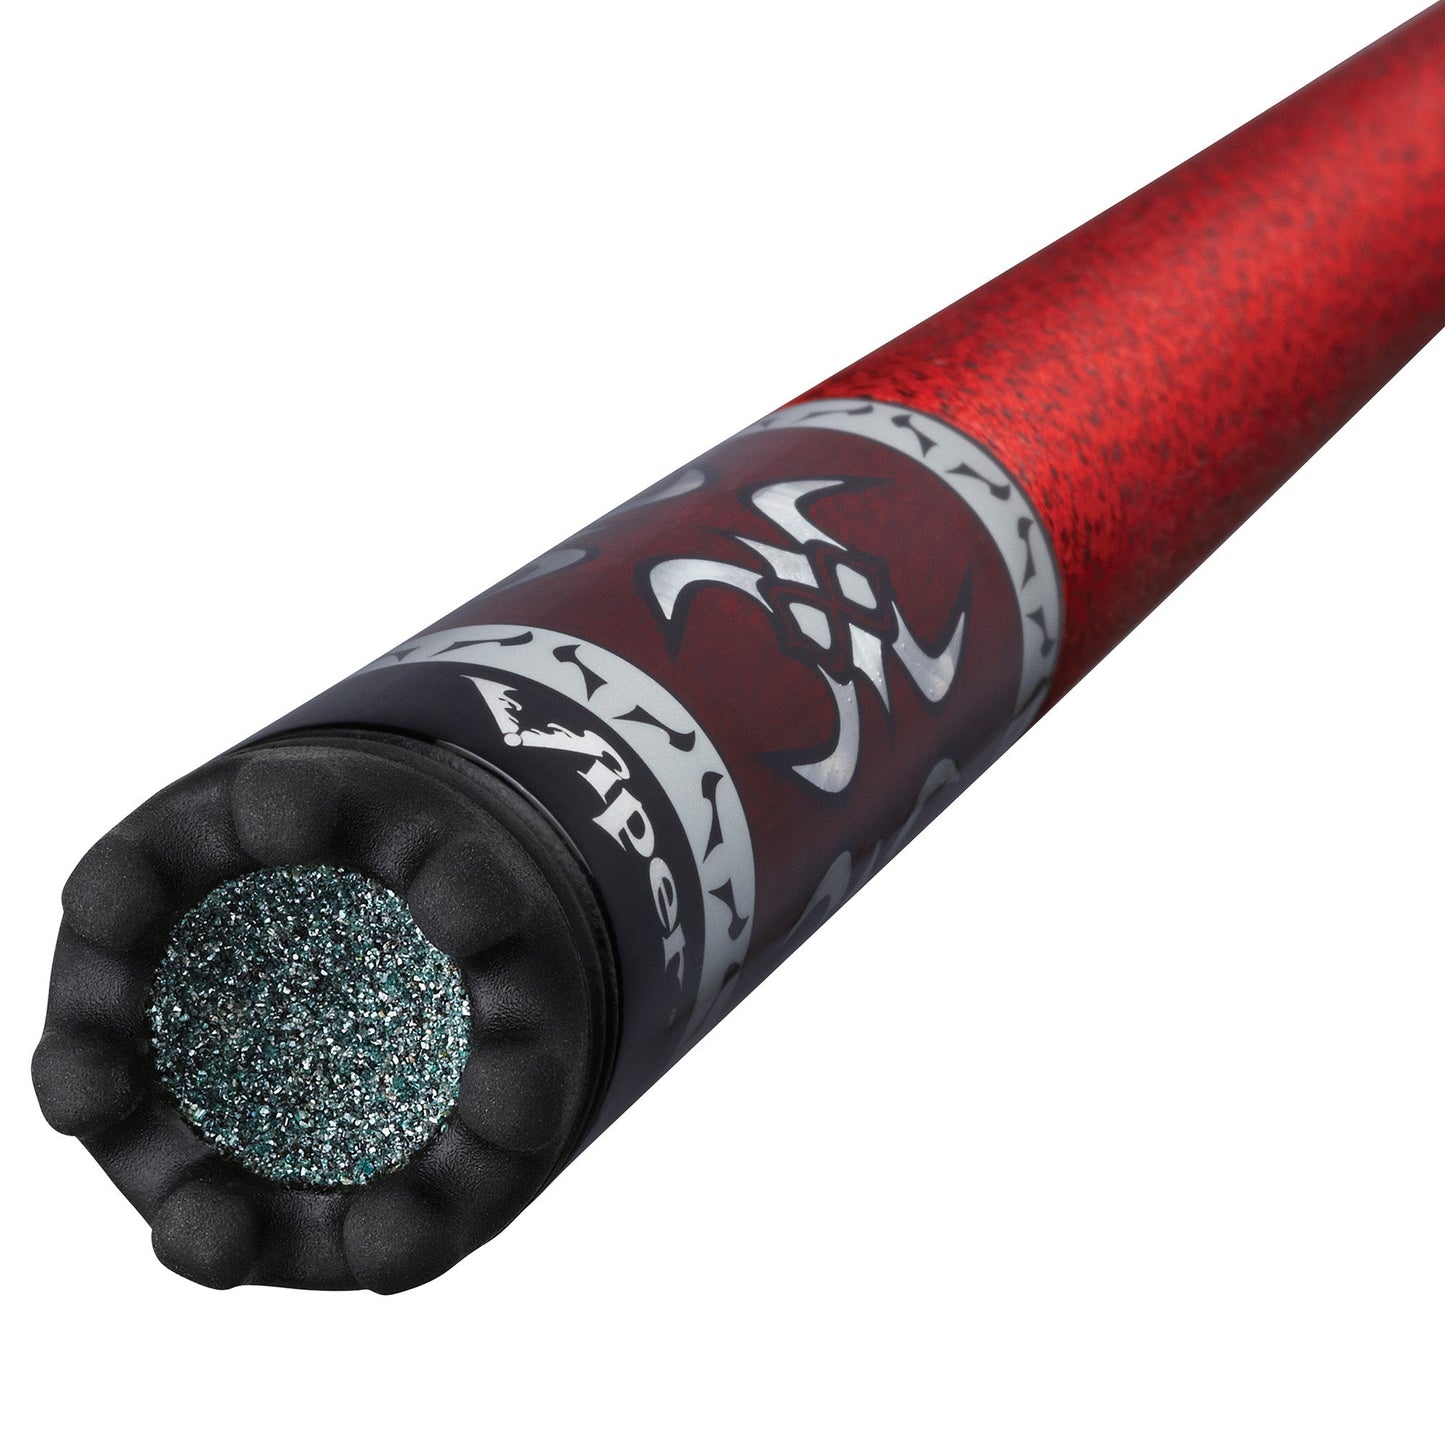 30 - Viper Sinister Red Wrap Pool Cue Stick 18 Ounce